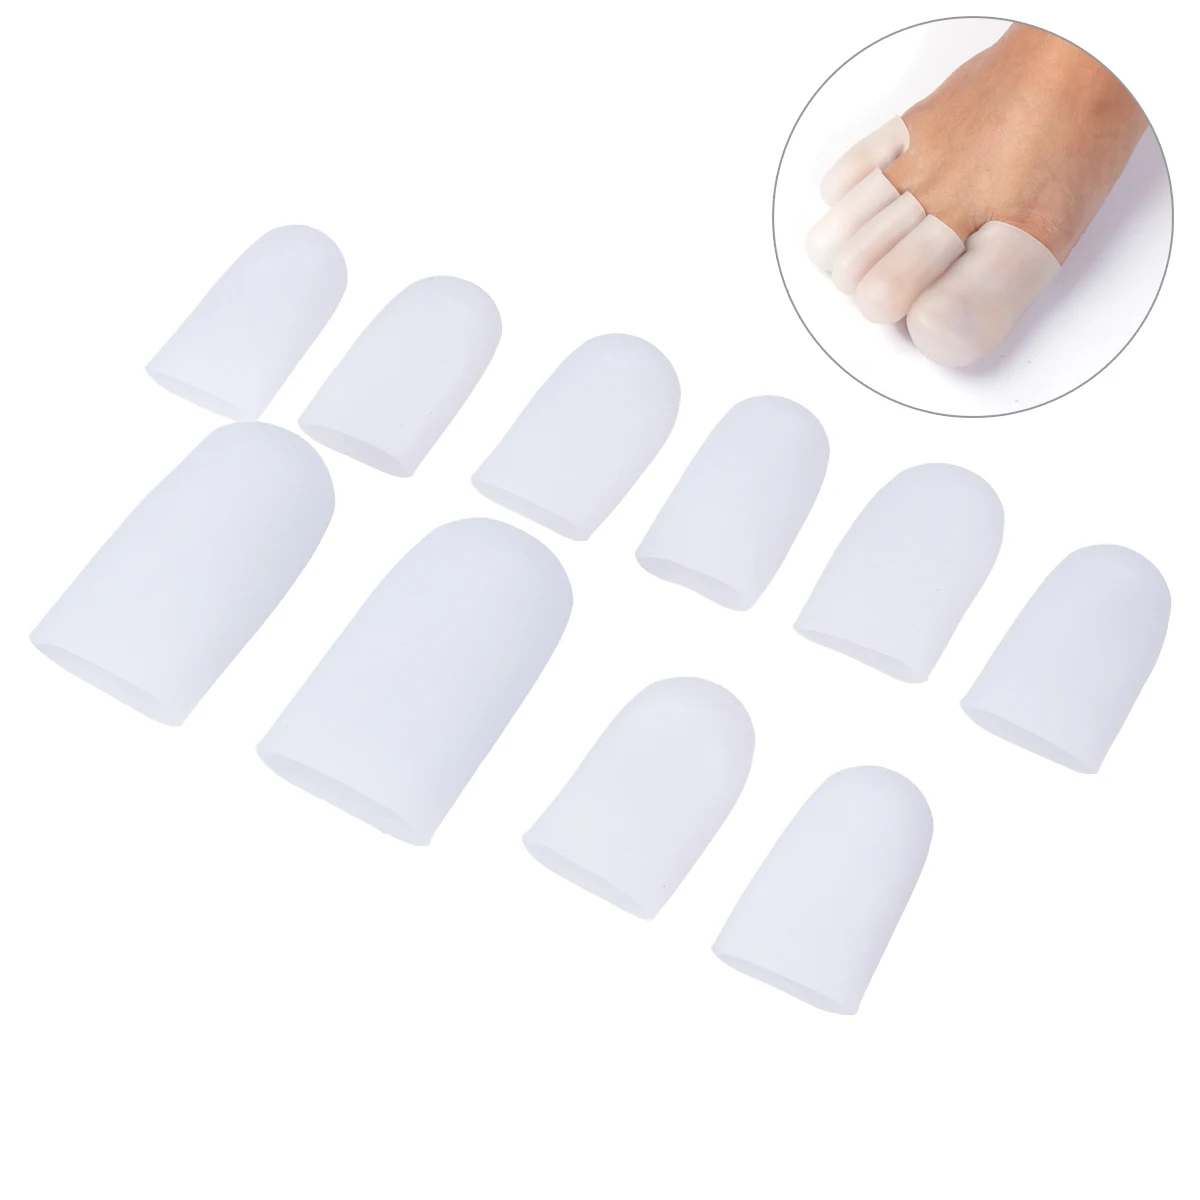 

5 Pairs Silicone Toe Sleeve Gel Toe Cap Cover Protector Finger Toe Gel Tube for Corn Blisters Pain Relief Massager Toe Sleeve